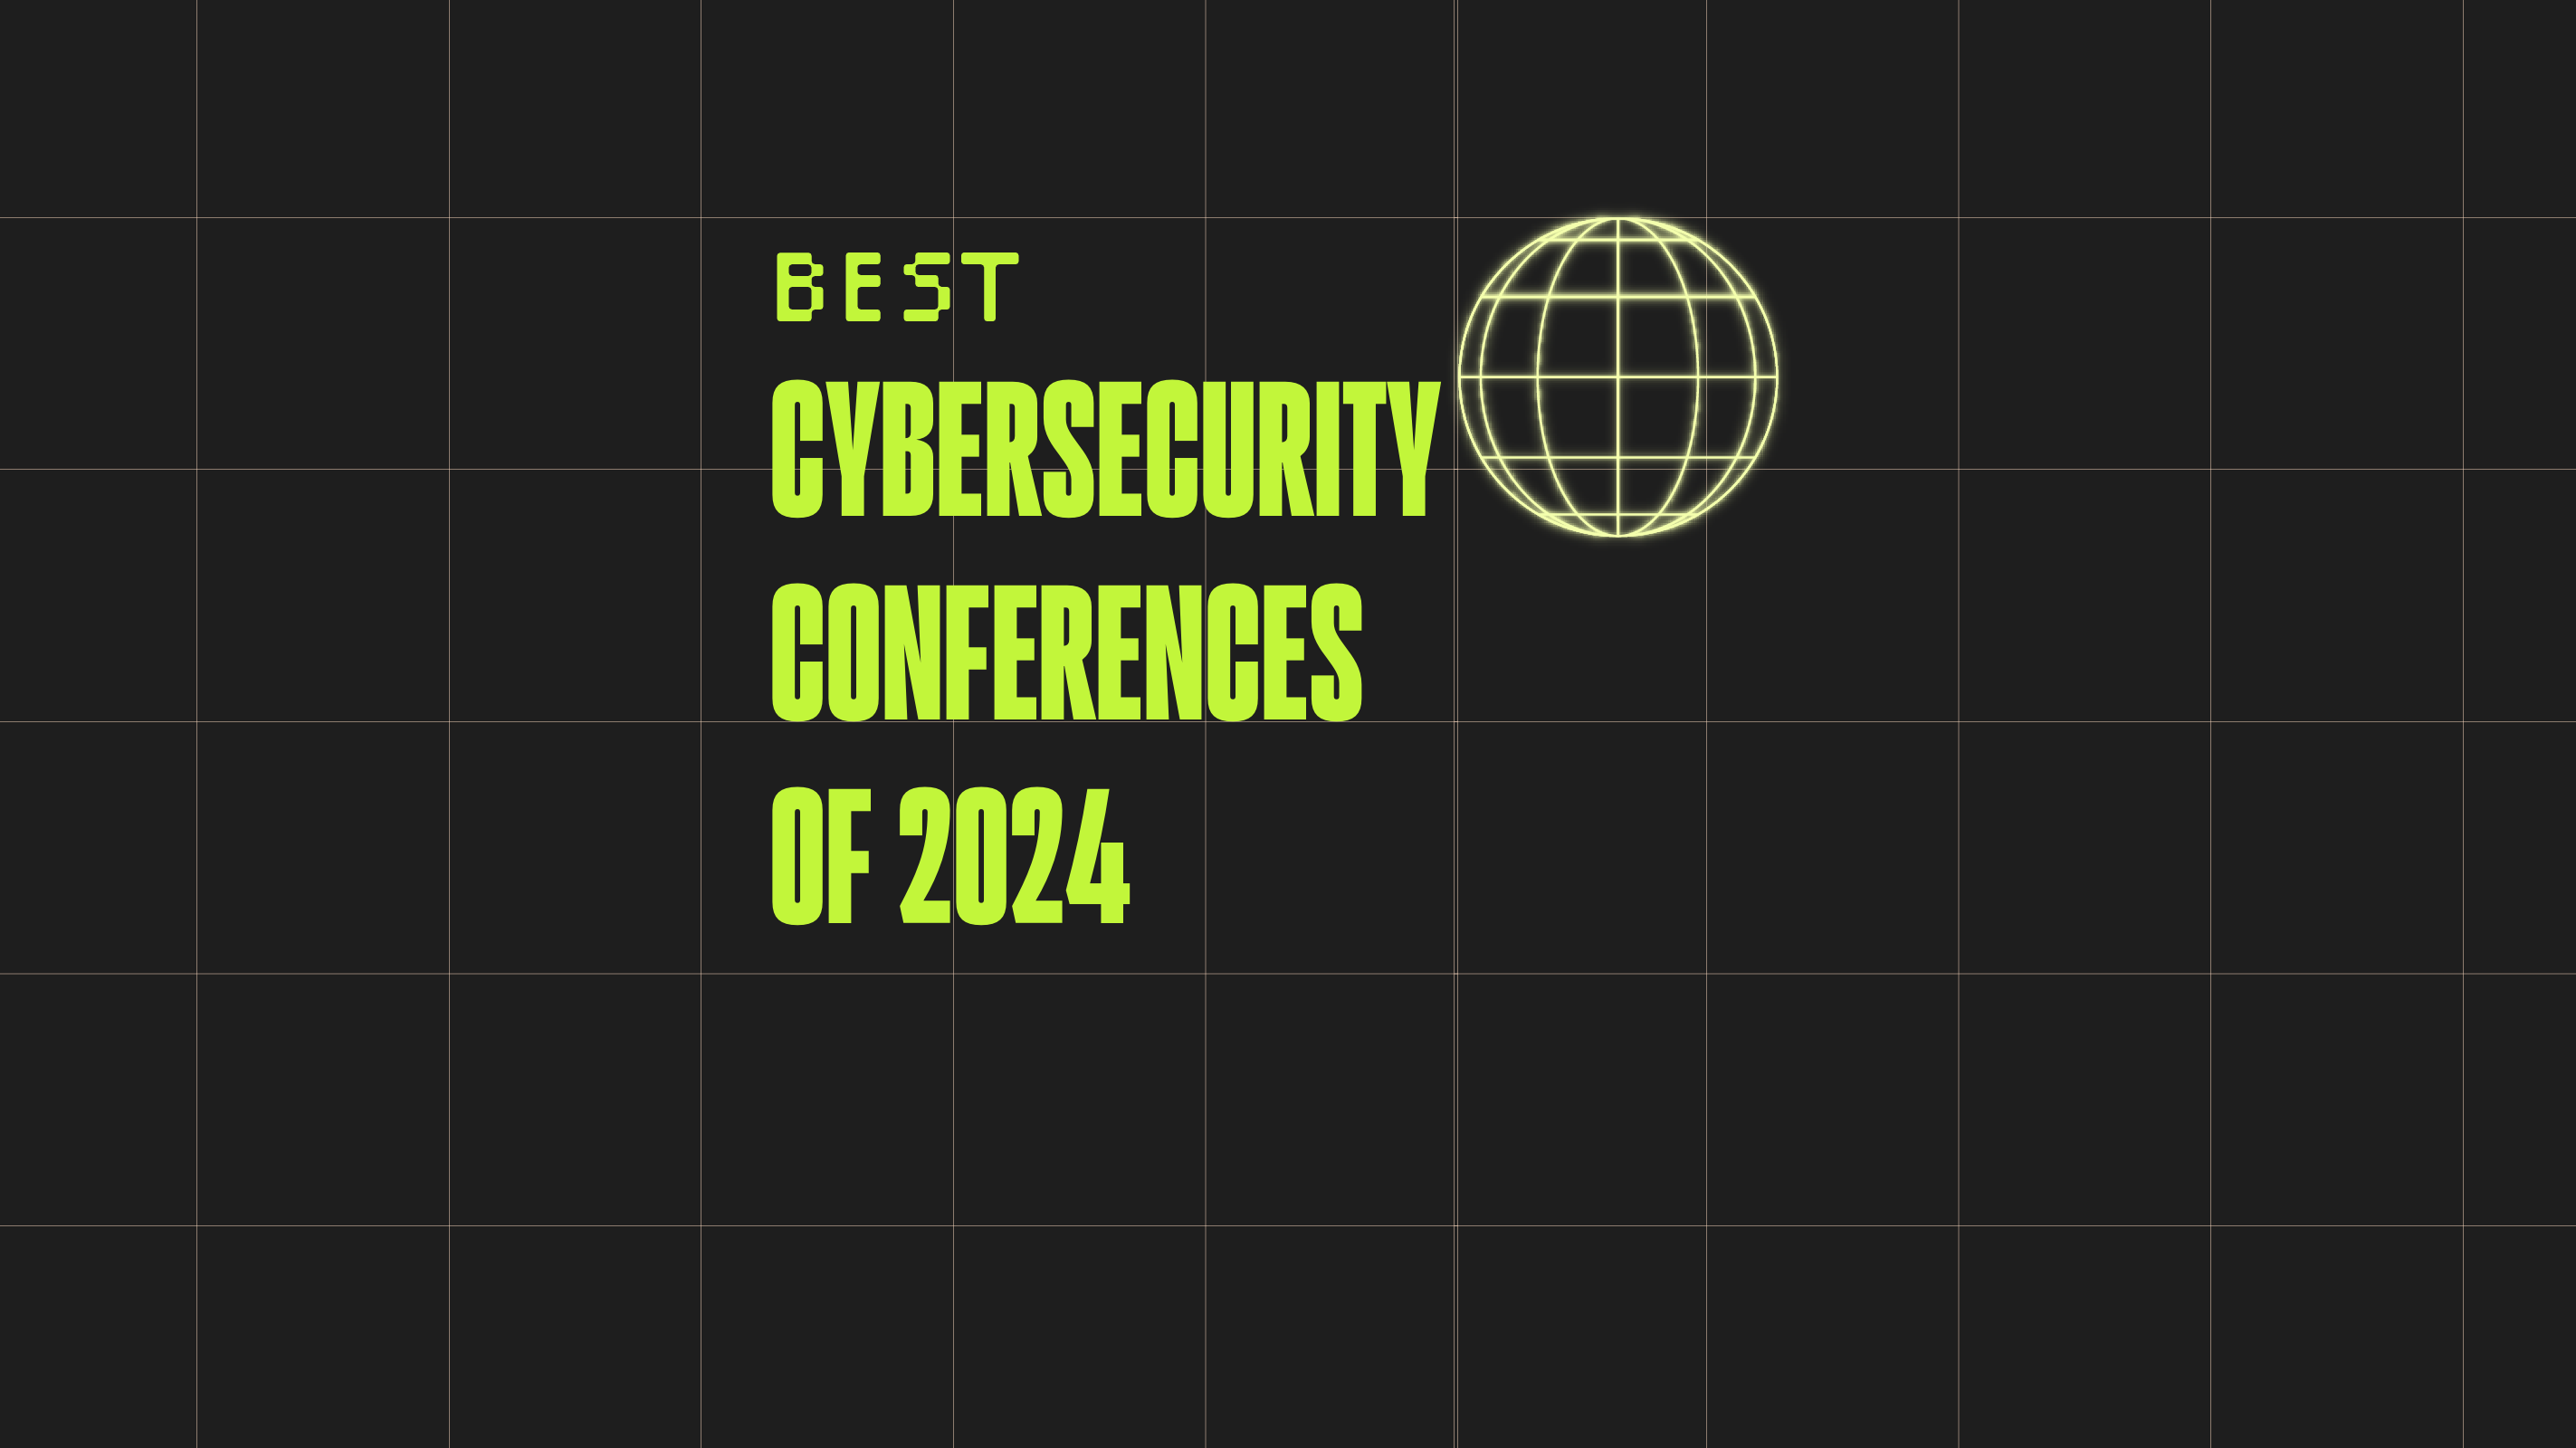 Cybersecurity conferences of 2024 best events